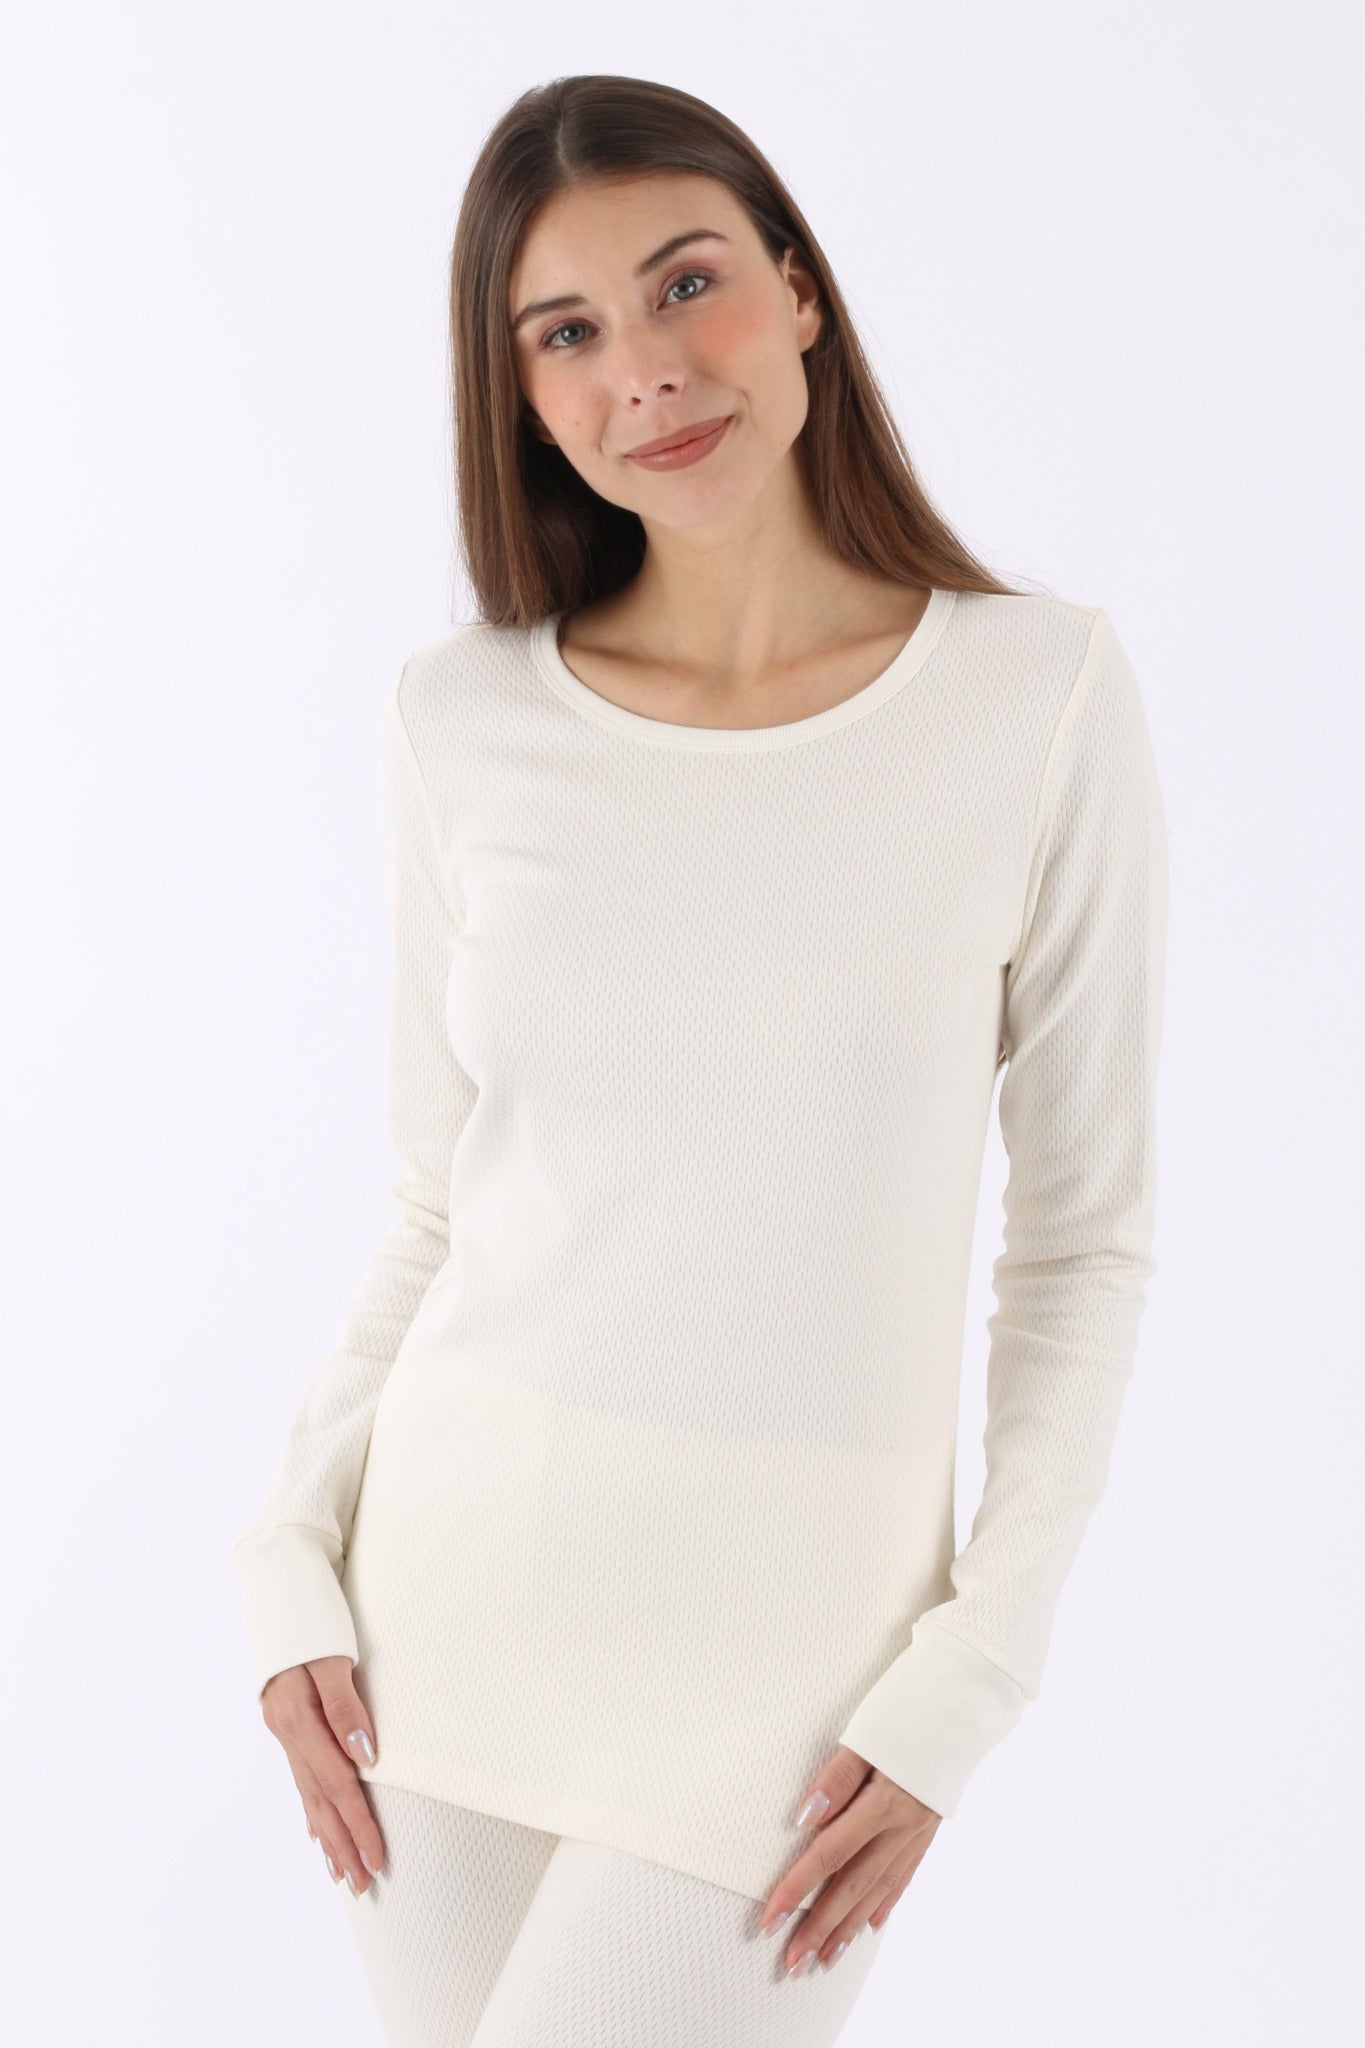 Womens Thermal Underwear With Built In Bra Shirt Long Sleeve Base